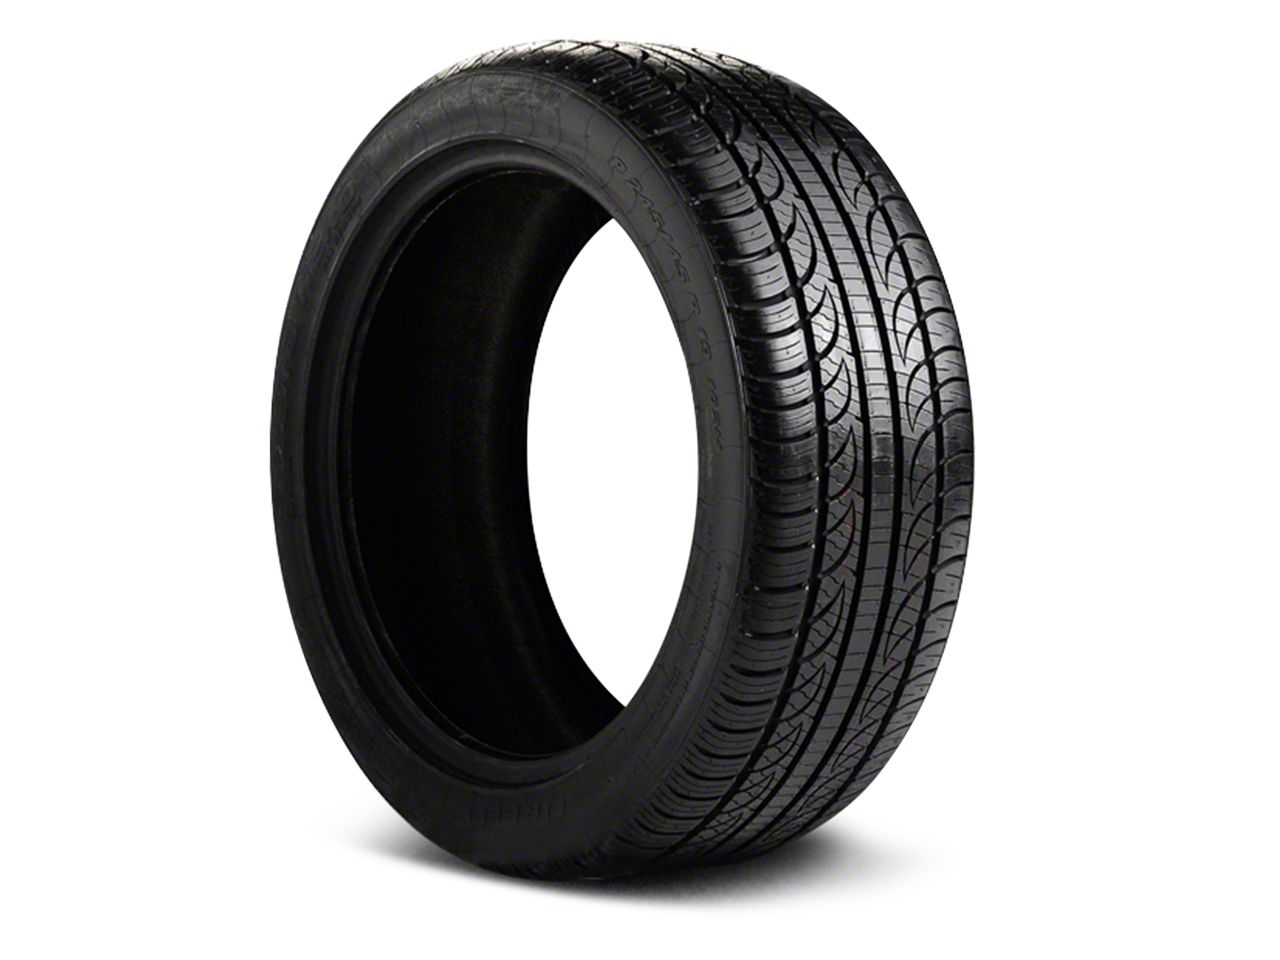 Mustang All Season Ford Tires 1994-1998